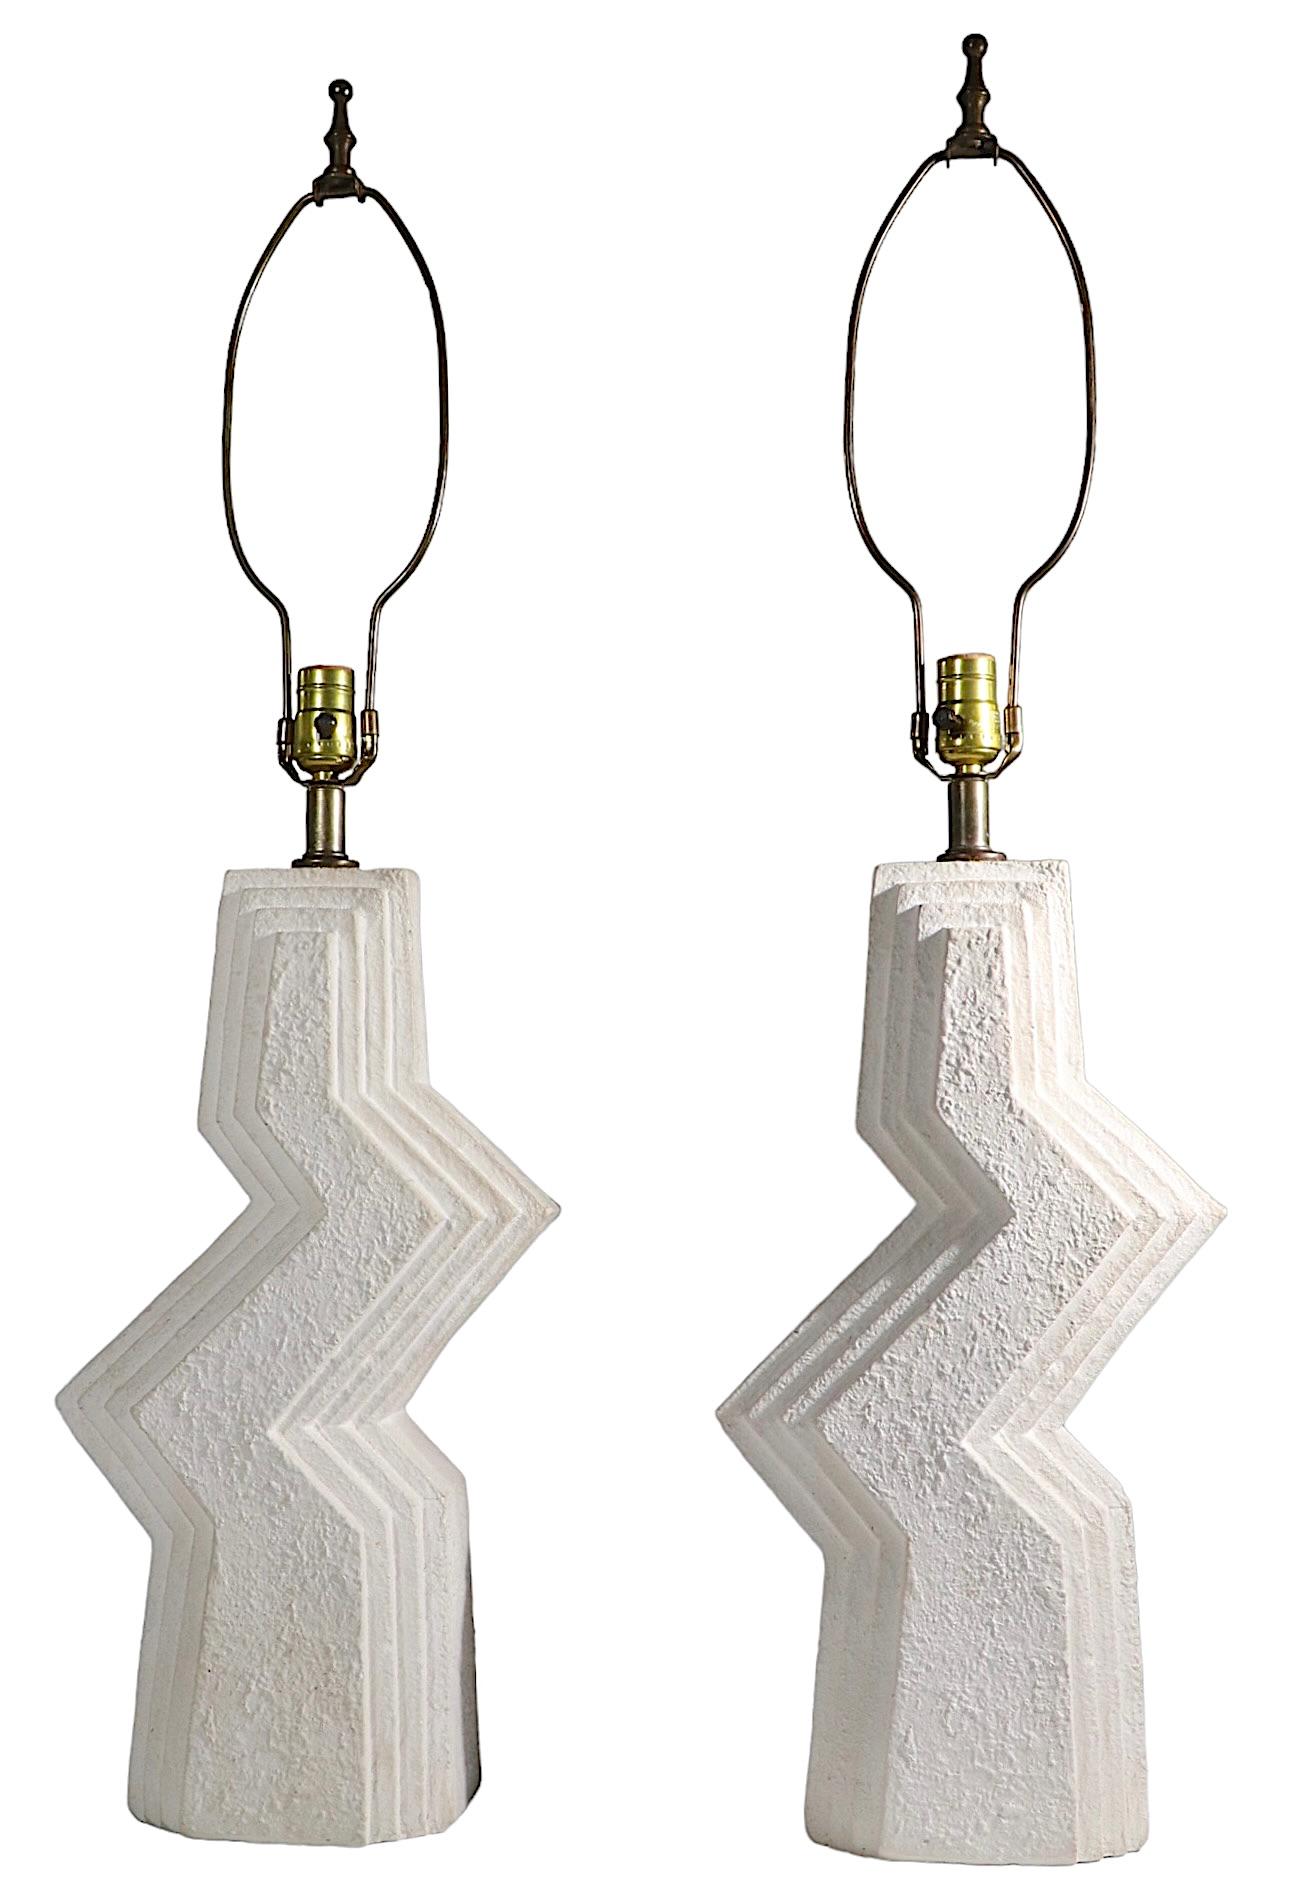 Chic pair of off white cast plaster zig zag table lamps, by Ziggurat, circa 1980's. Both are in very good, original clean and working condition, shades not included. Free of chips, cracks or repairs, both show minor cosmetic wear, normal and